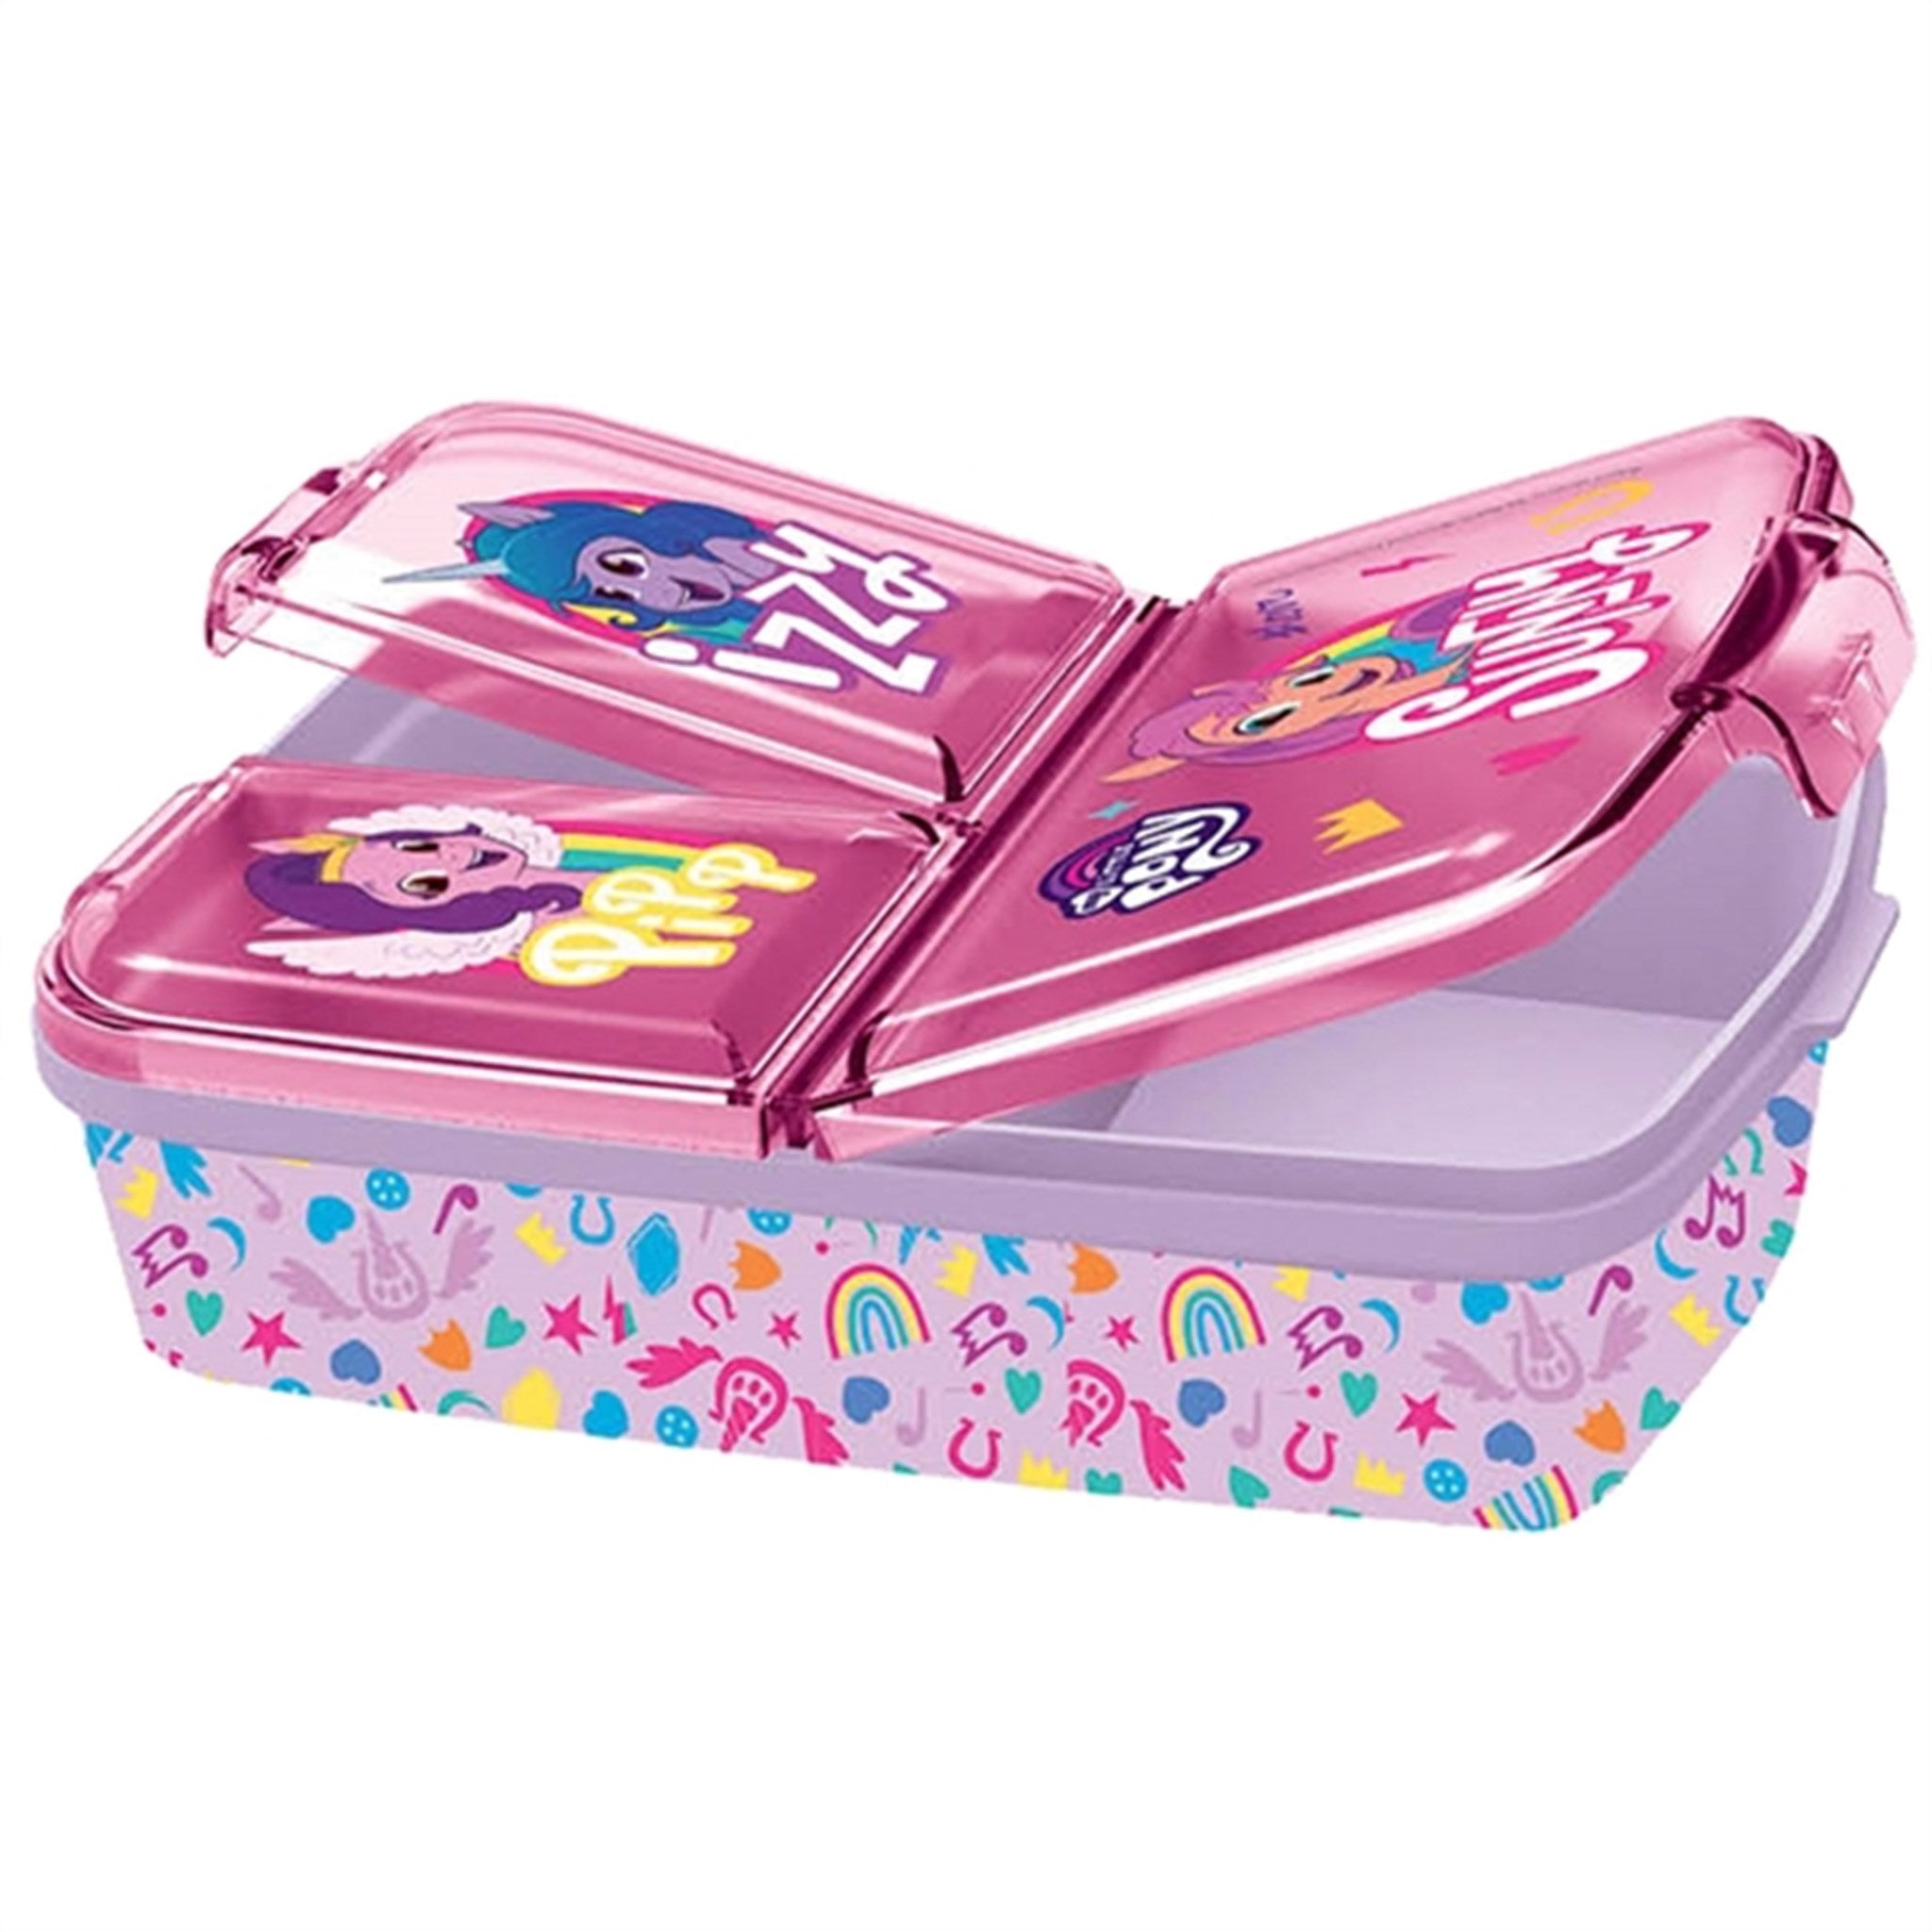 Euromic My Little Pony Lunch Box